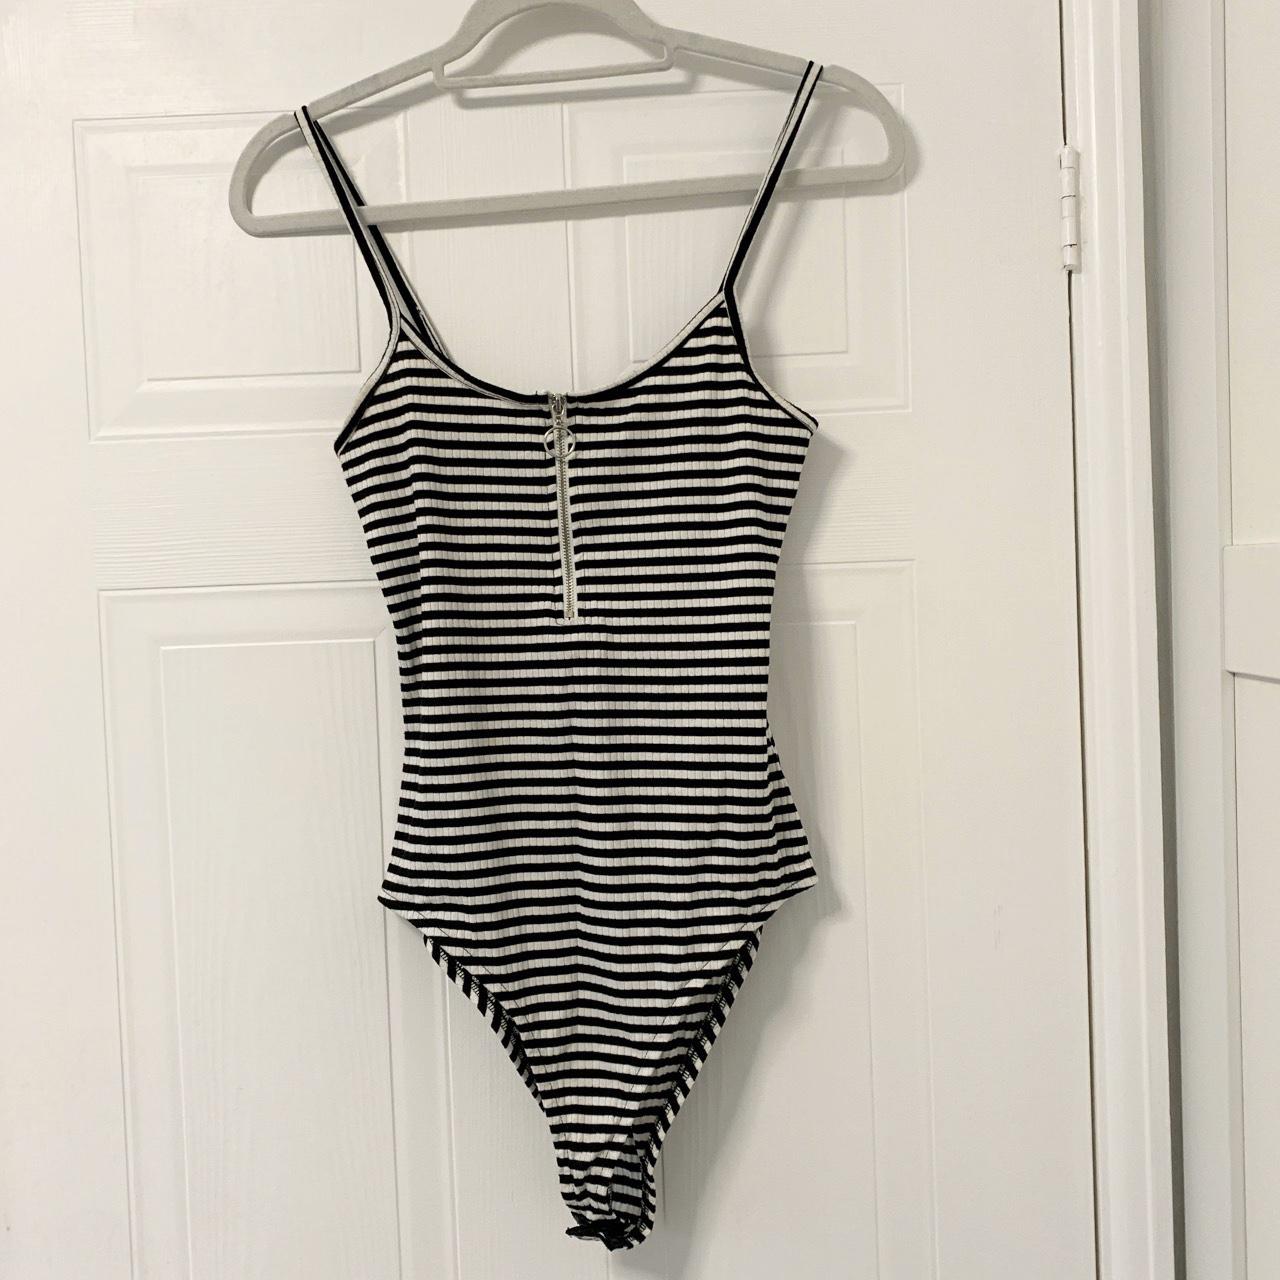 Primark striped body suit with popper closure and